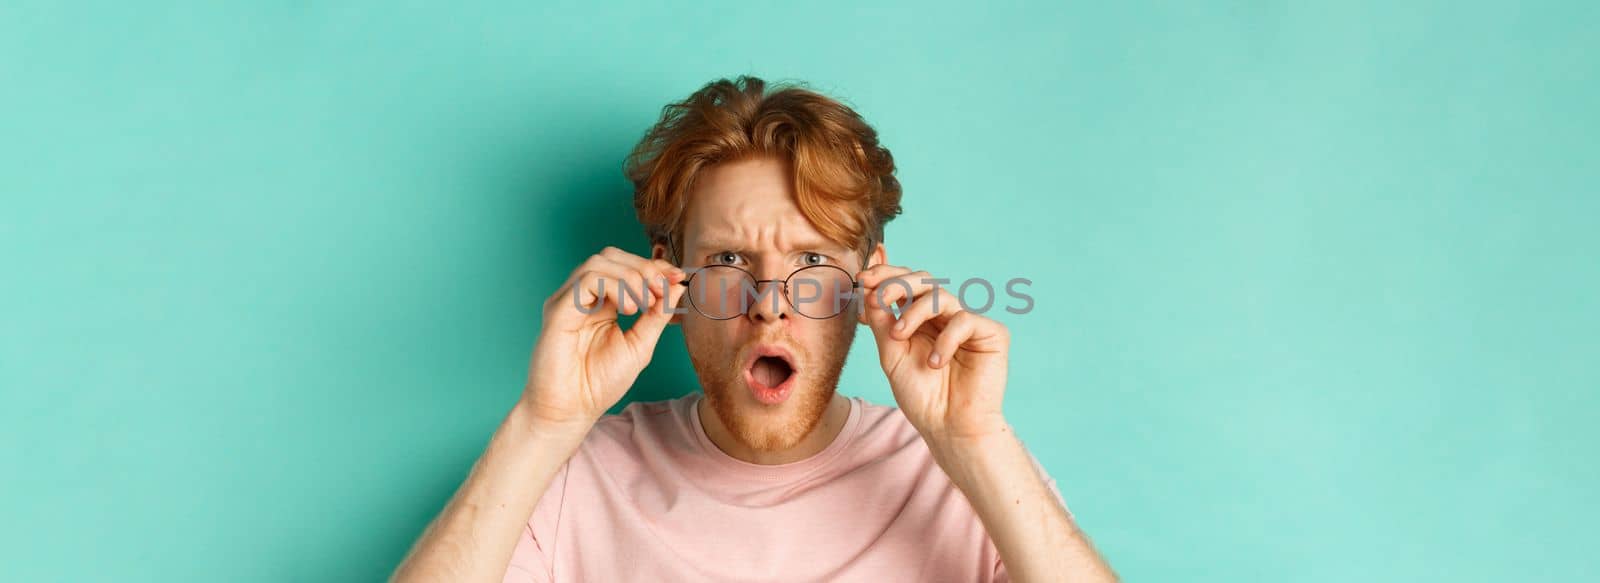 Close up portrait of redhead guy take-off glasses and gasping startled, looking shocked at camera, standing over turquoise background.